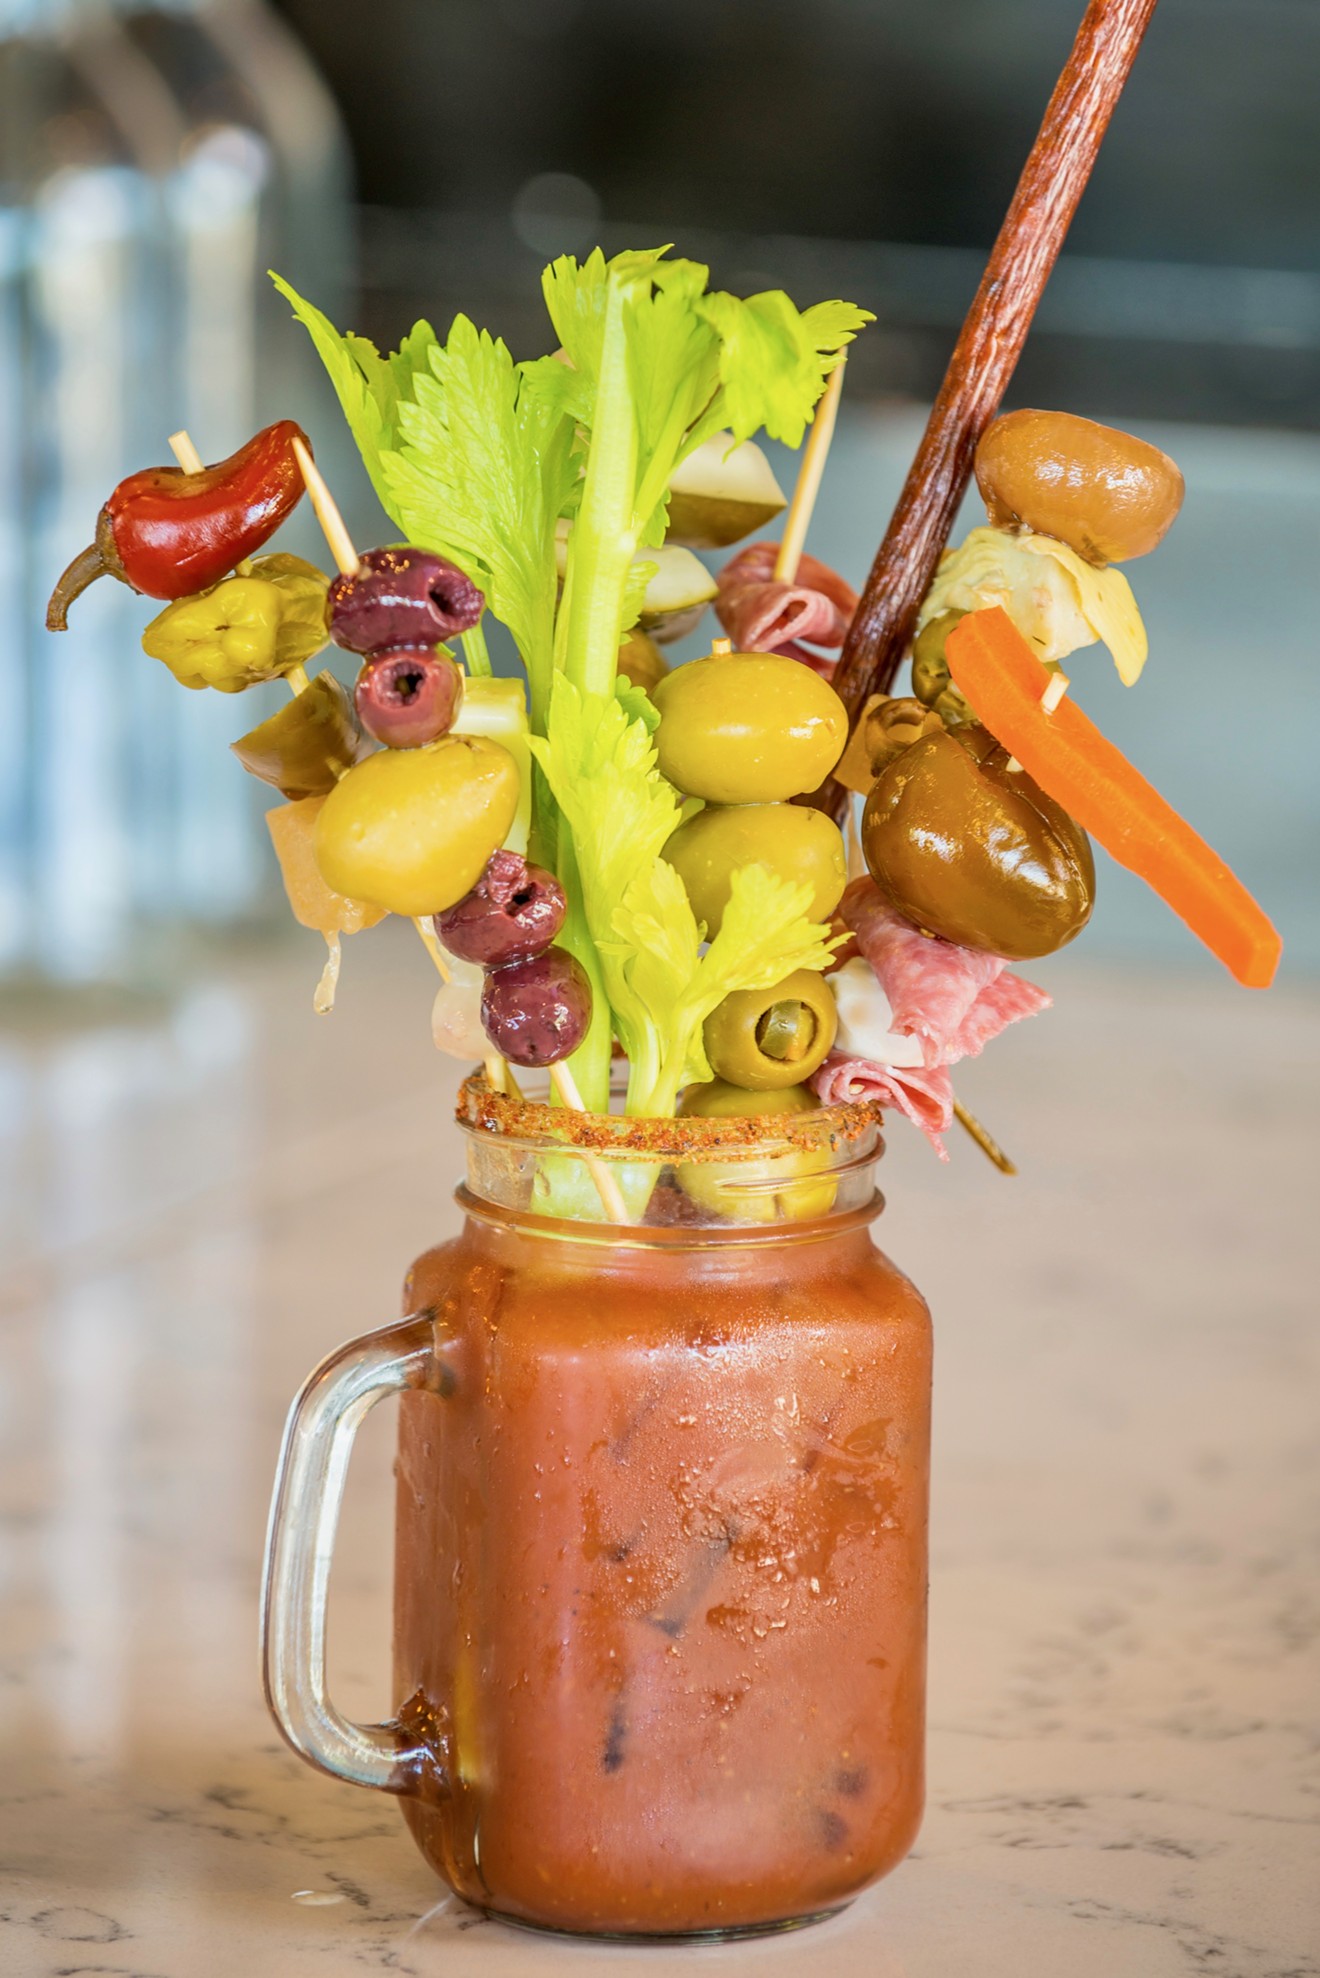 A crazy Bloody Mary? Here's where to find them in the Valley – including this one from Hash Kitchen.